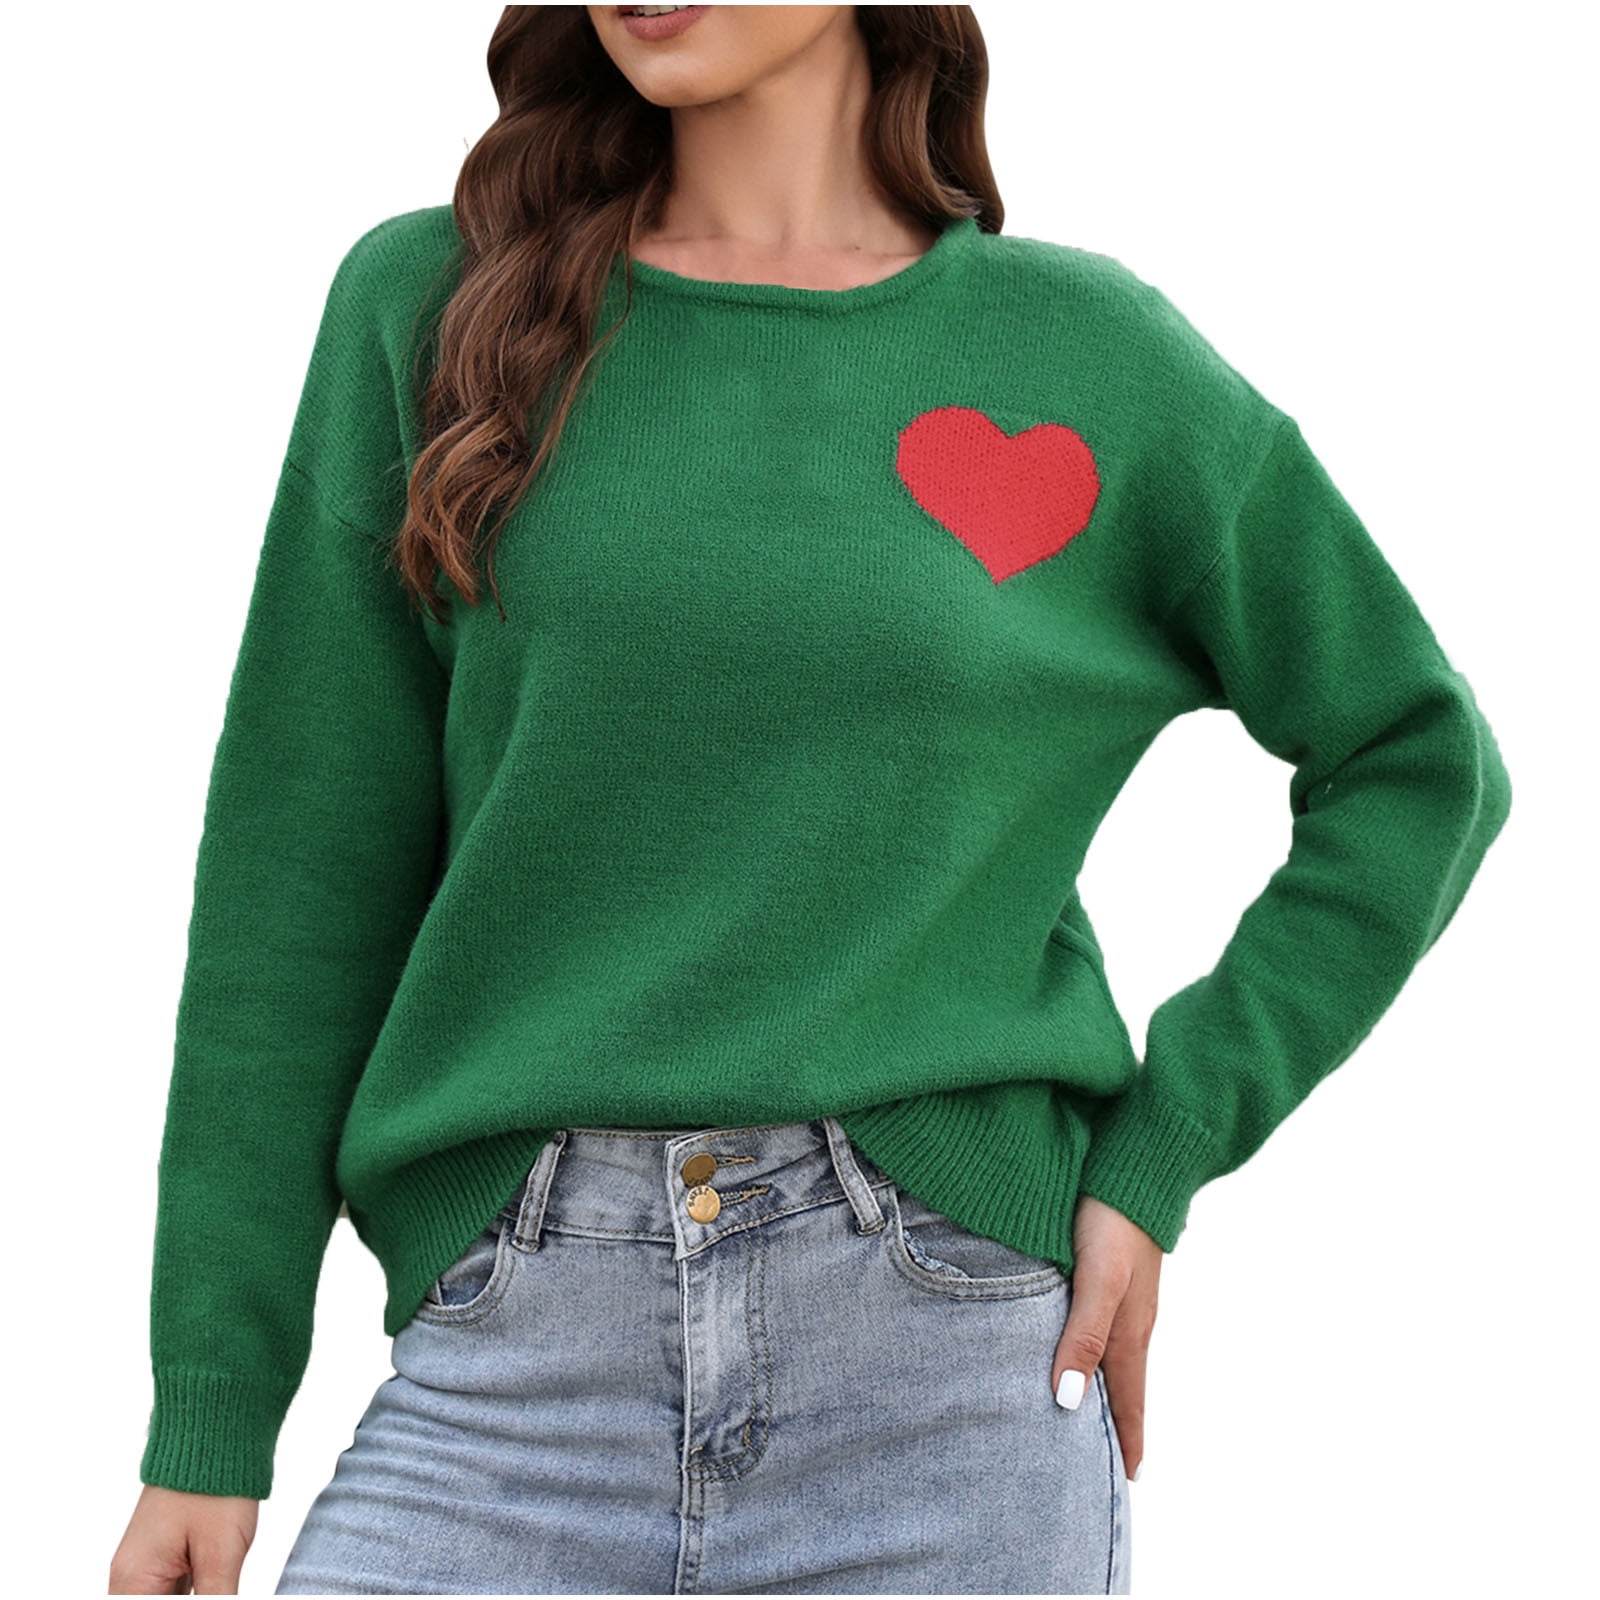 Fuzzy Hearts Knit Sweater in Pink